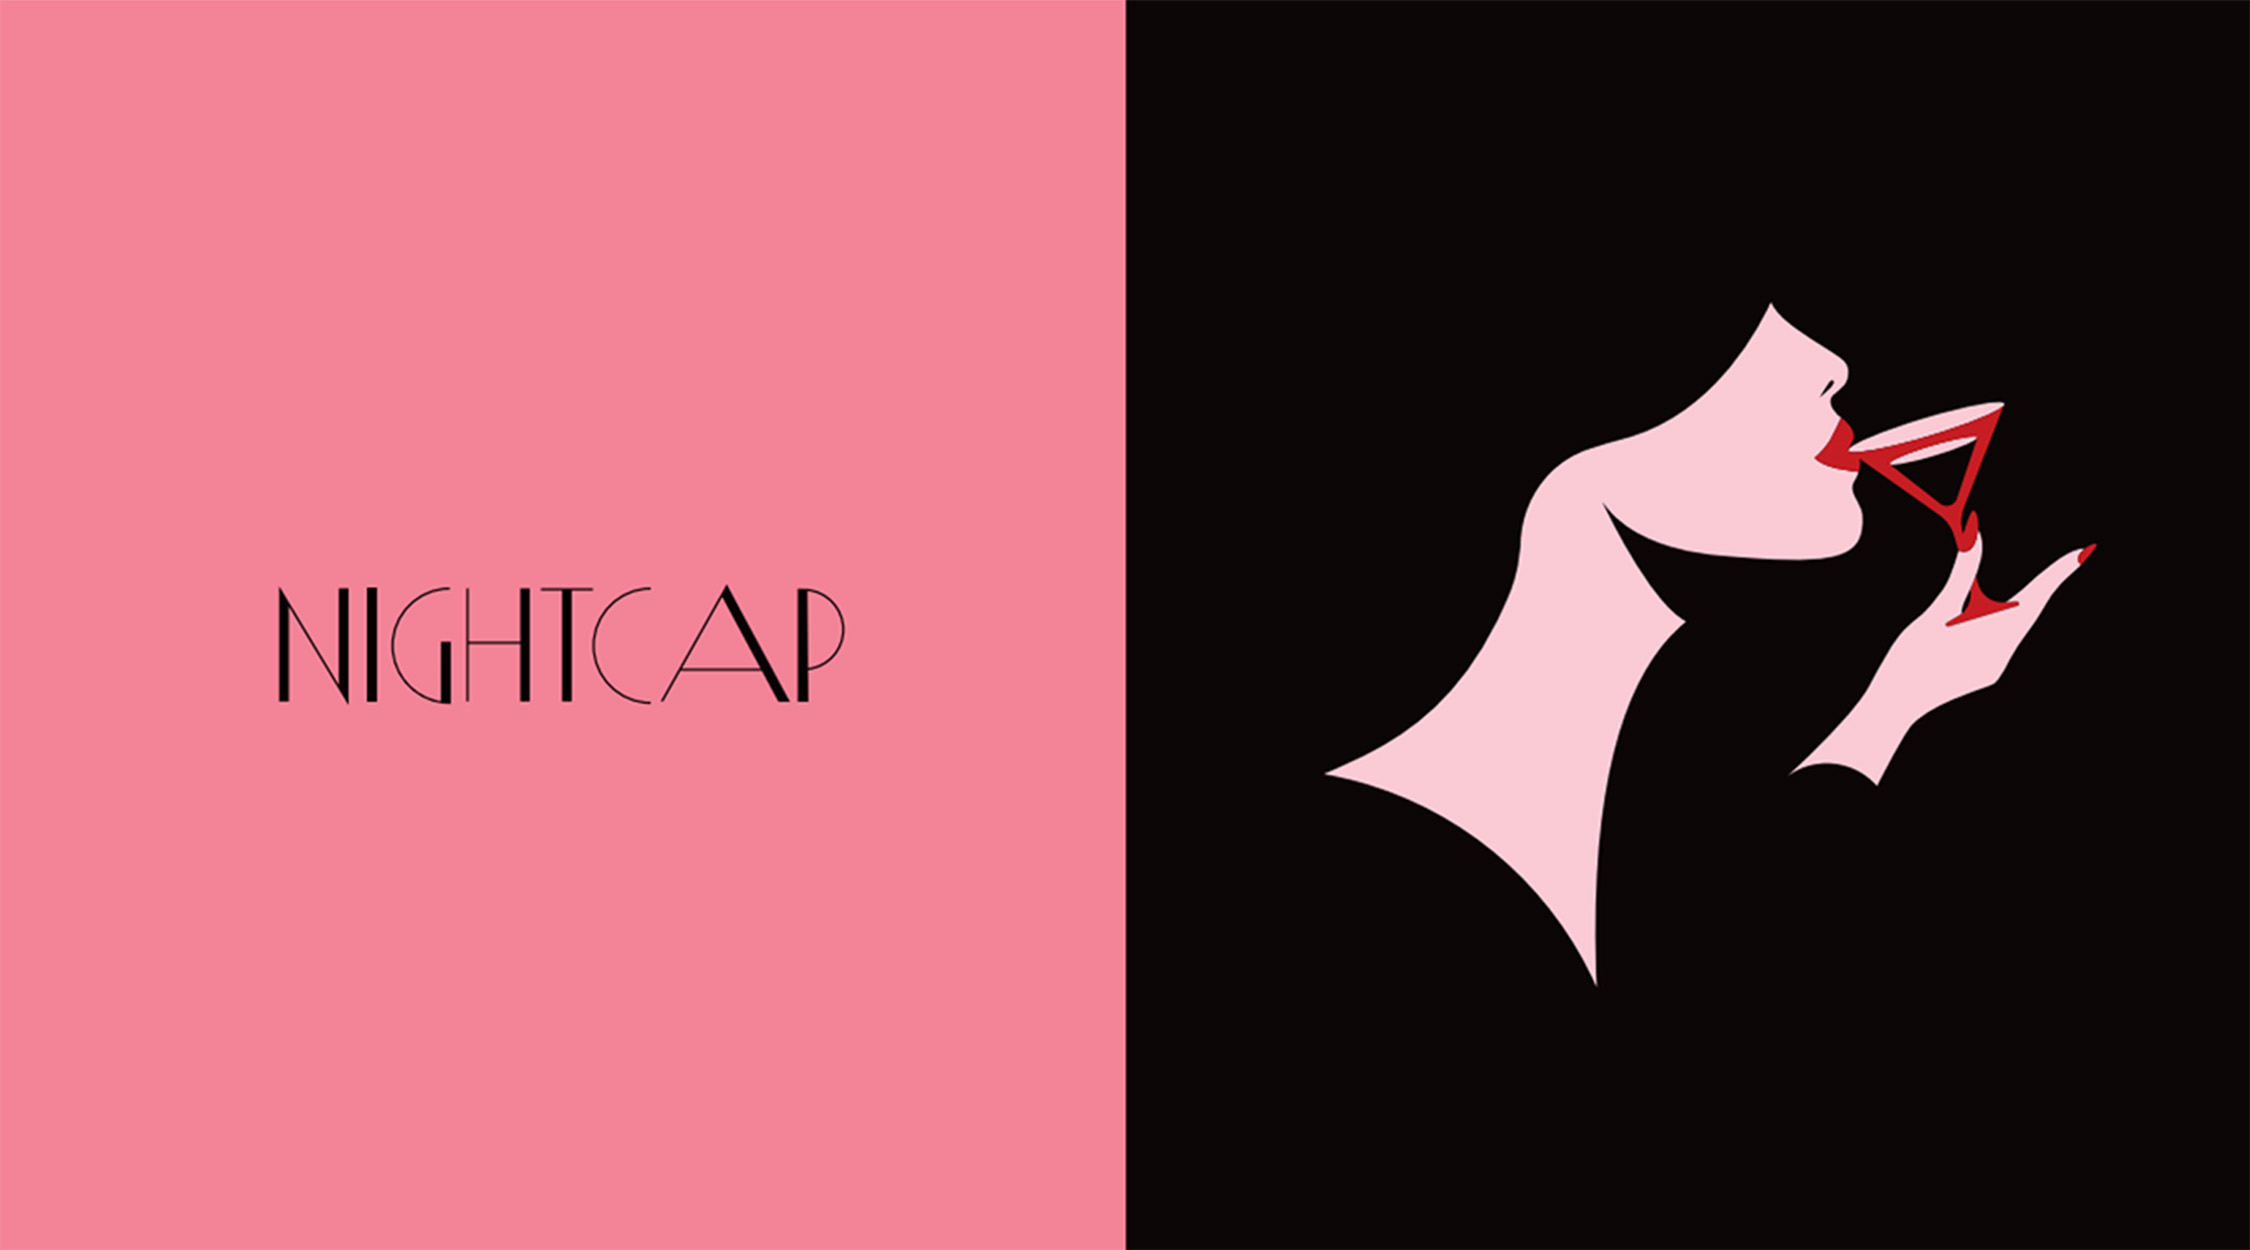 Nightcap logo showing the outline of a woman sipping a cocktail from a martini glass